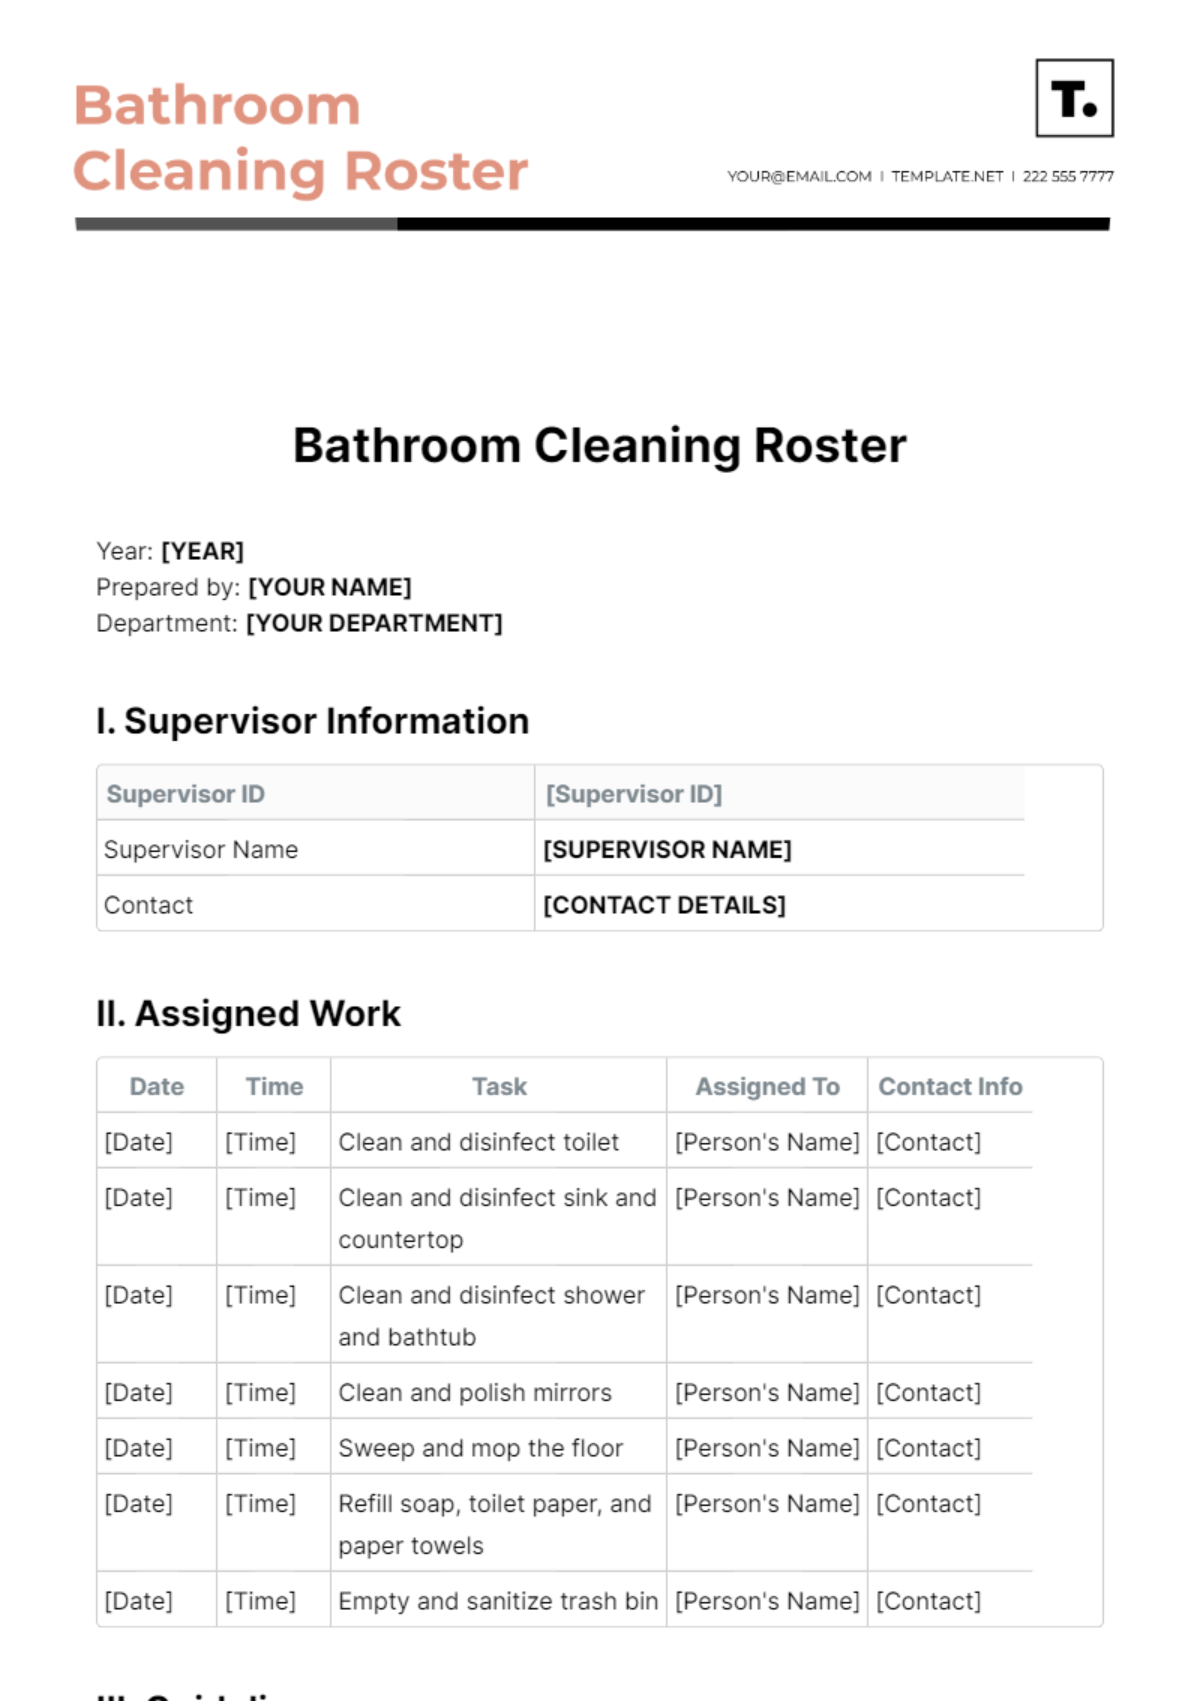 Bathroom Cleaning Roster Template